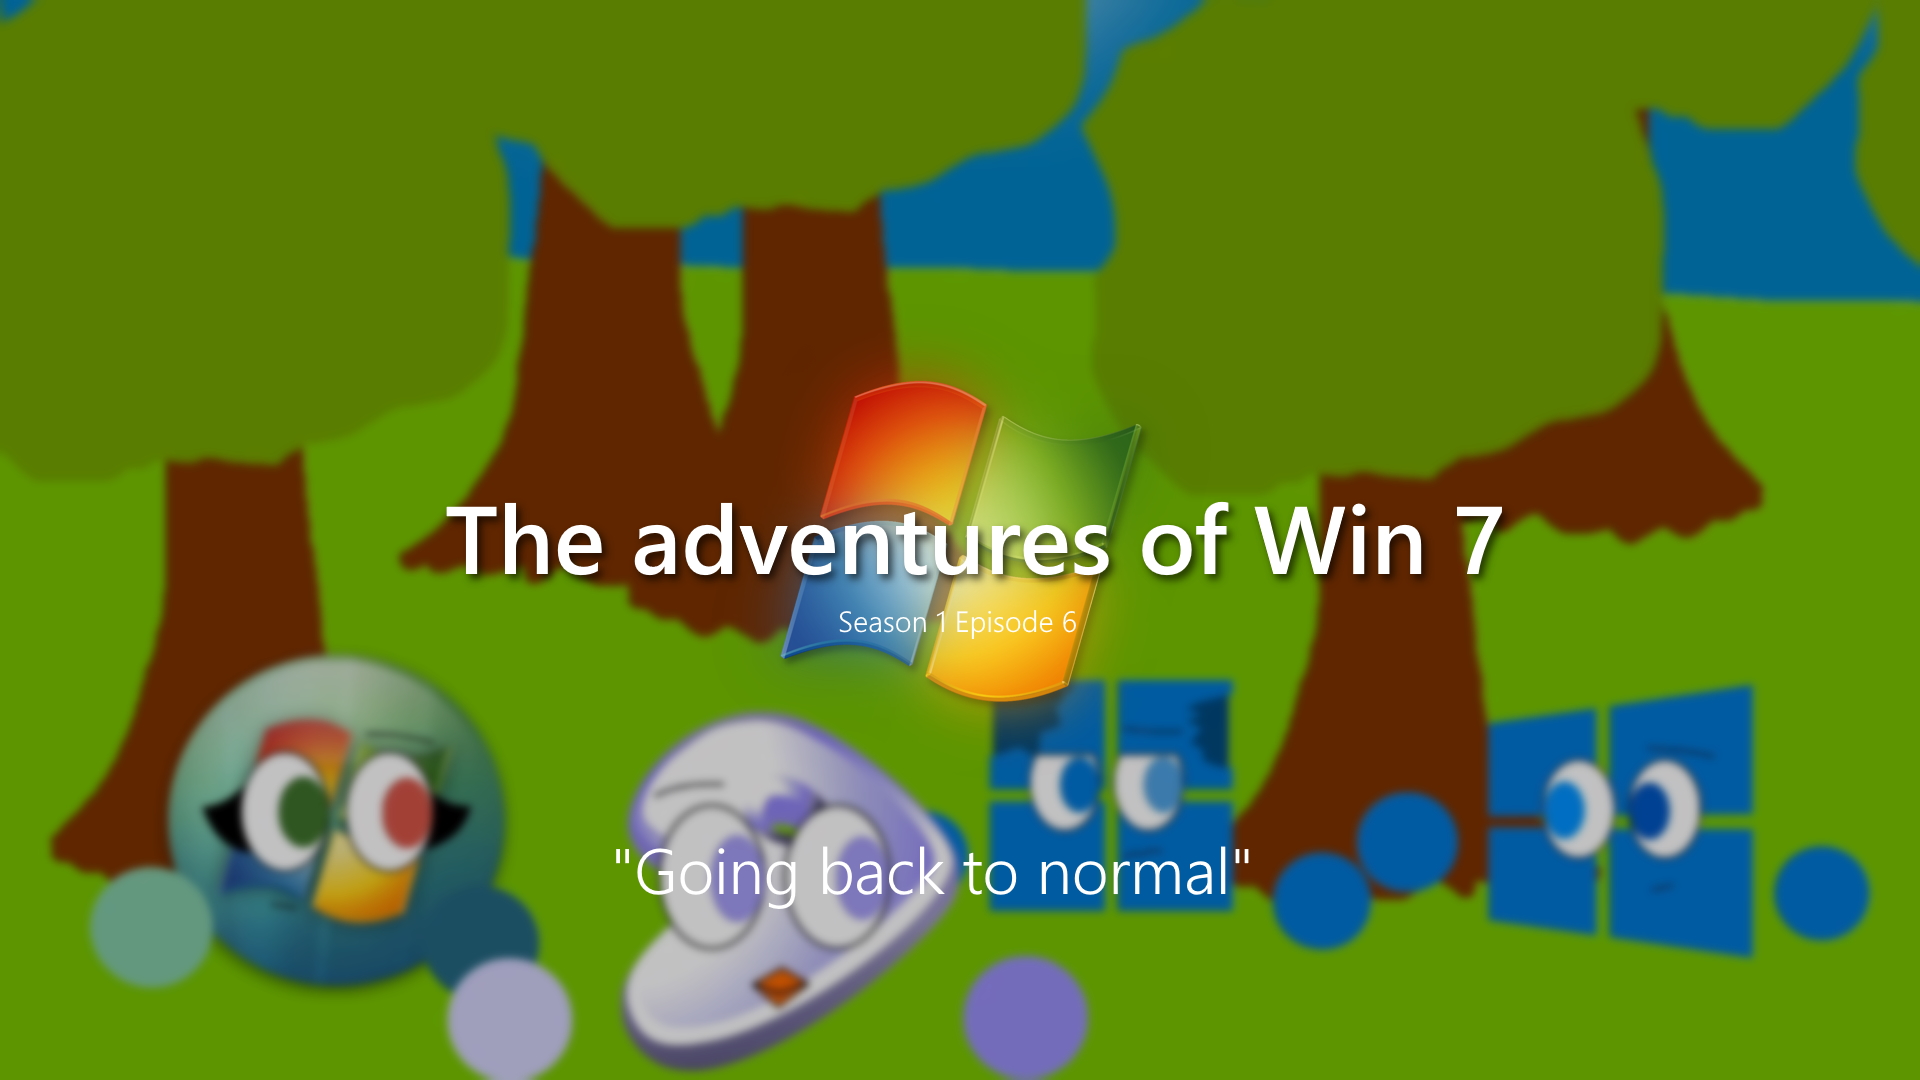 The Adventures Of Win 7 Season 1 Episode 6 Going back to normal